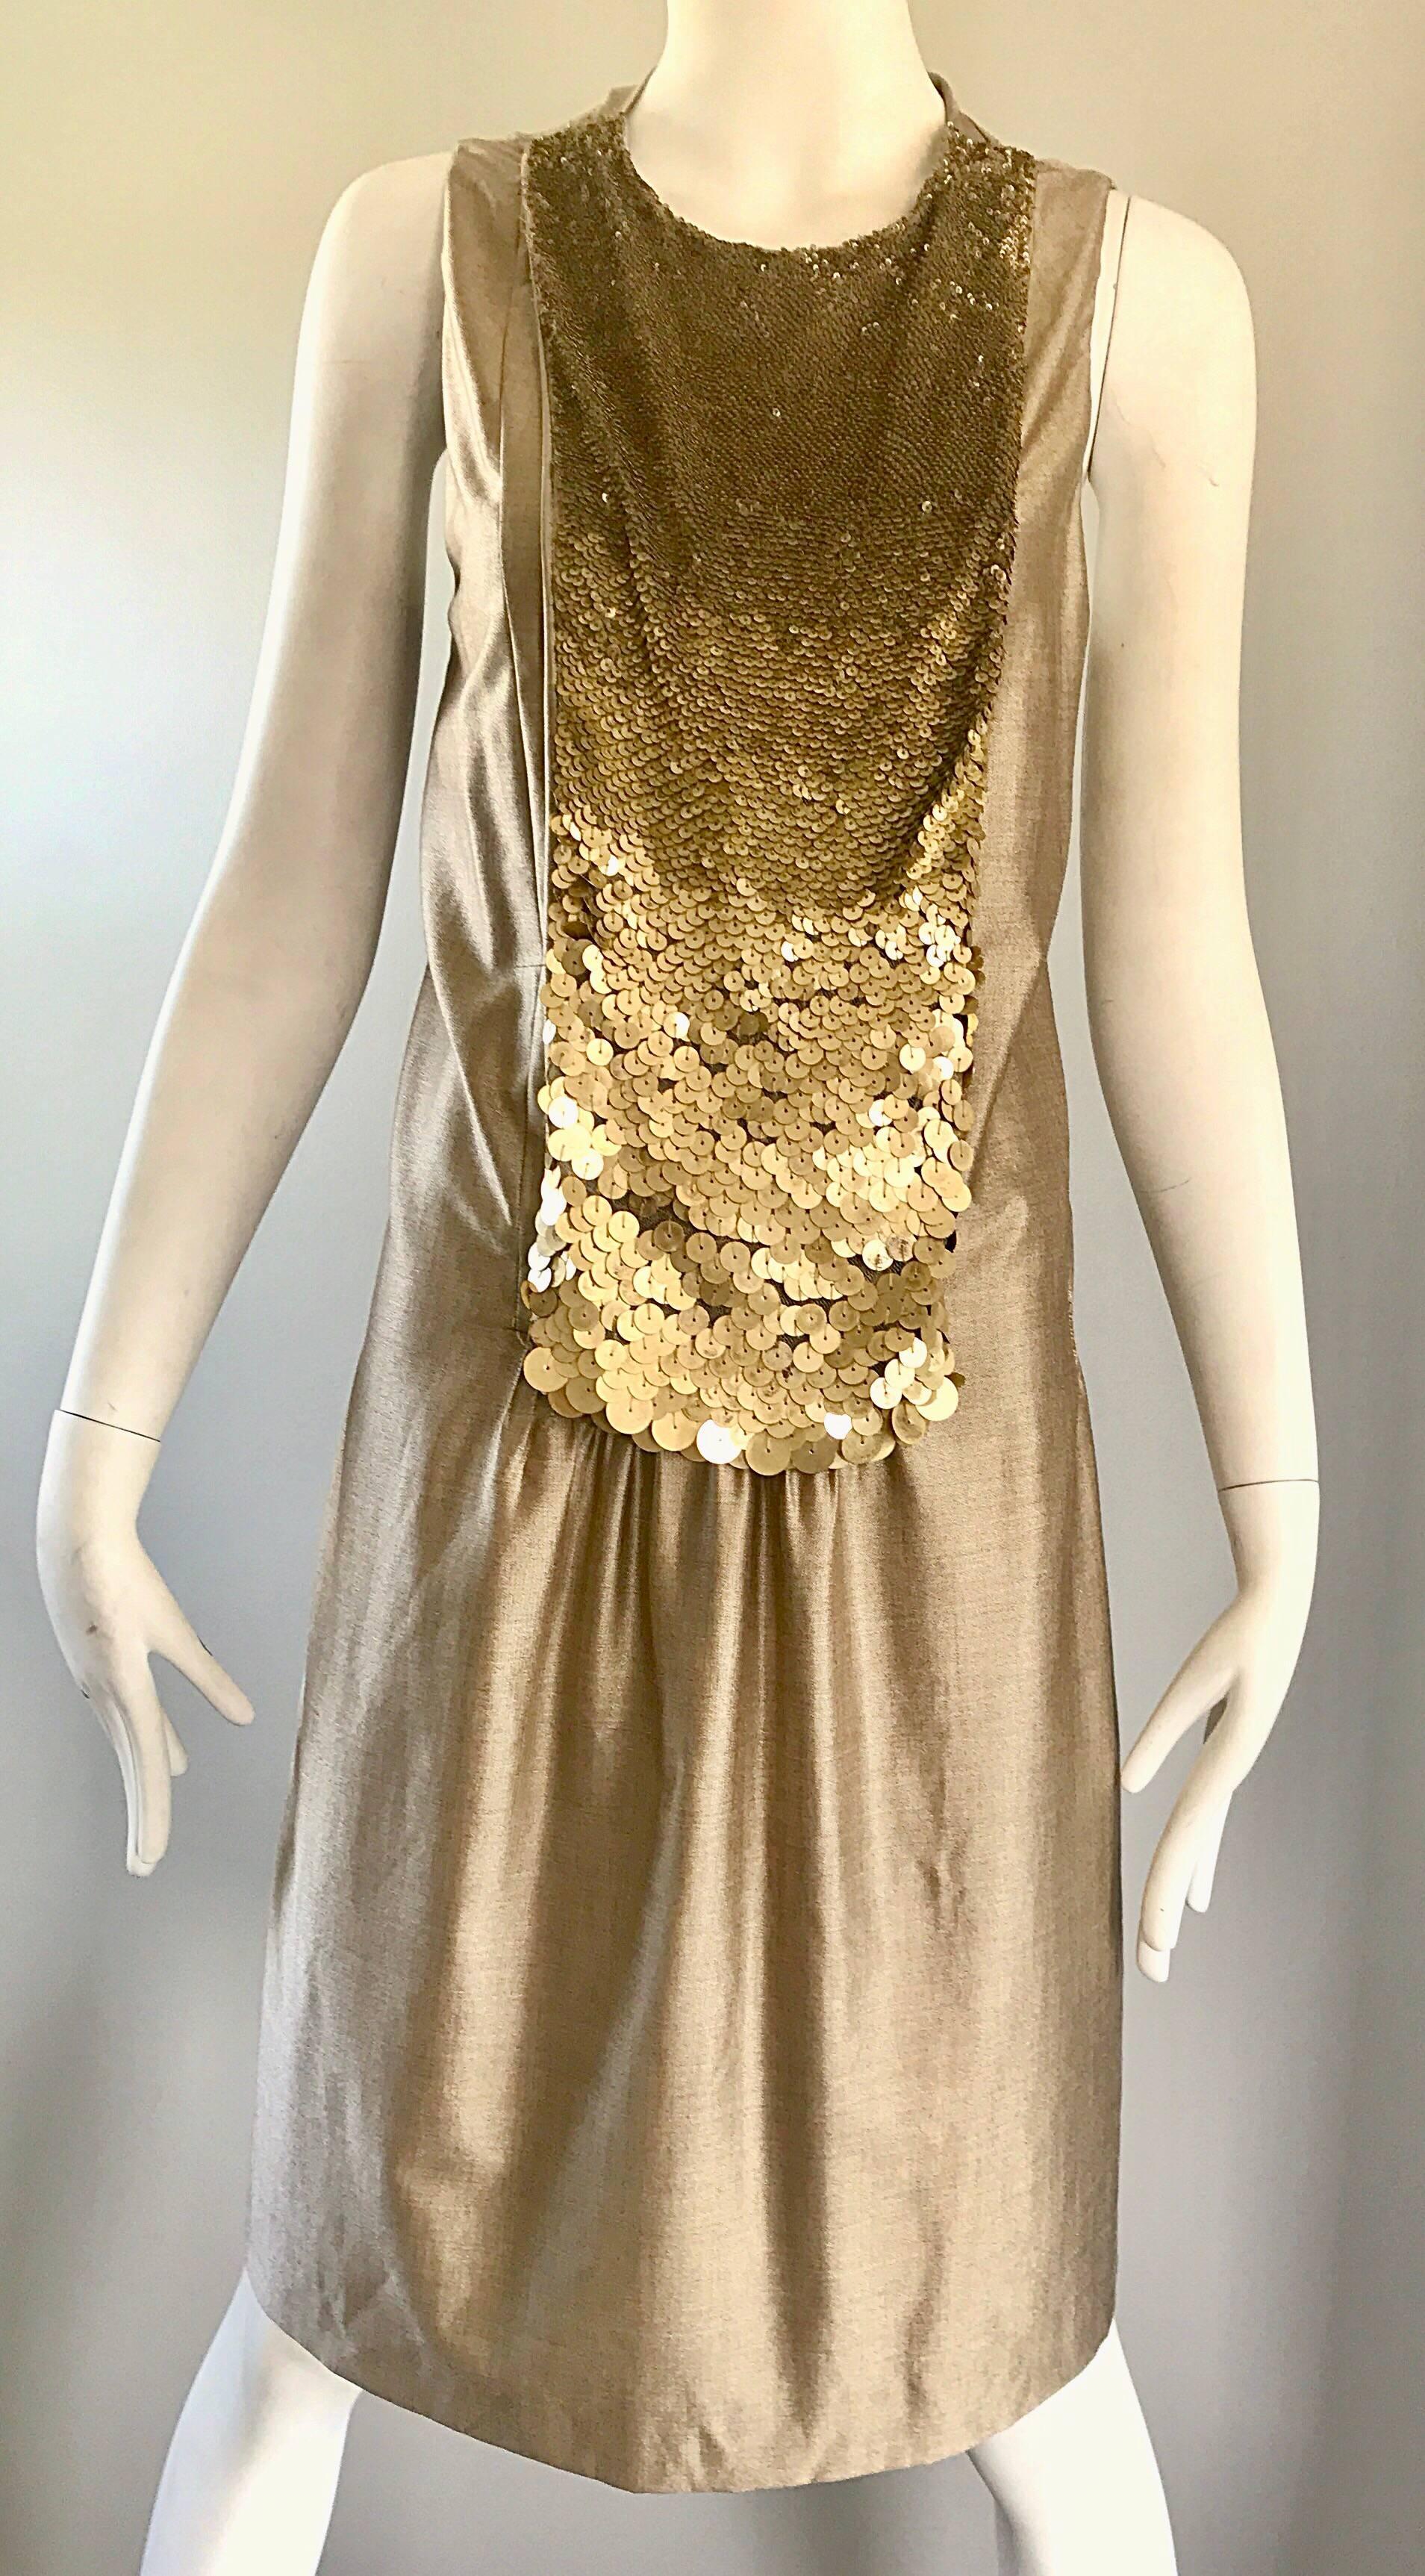 Brand new early 2000s vintage LUCA LUCA gold metallic 1920s style sequined bib collar shift dress! Features thousands of hand-sewn matte gold sequins on the attached bib on the front. Flattering shift style is perfect for an array of shapes and